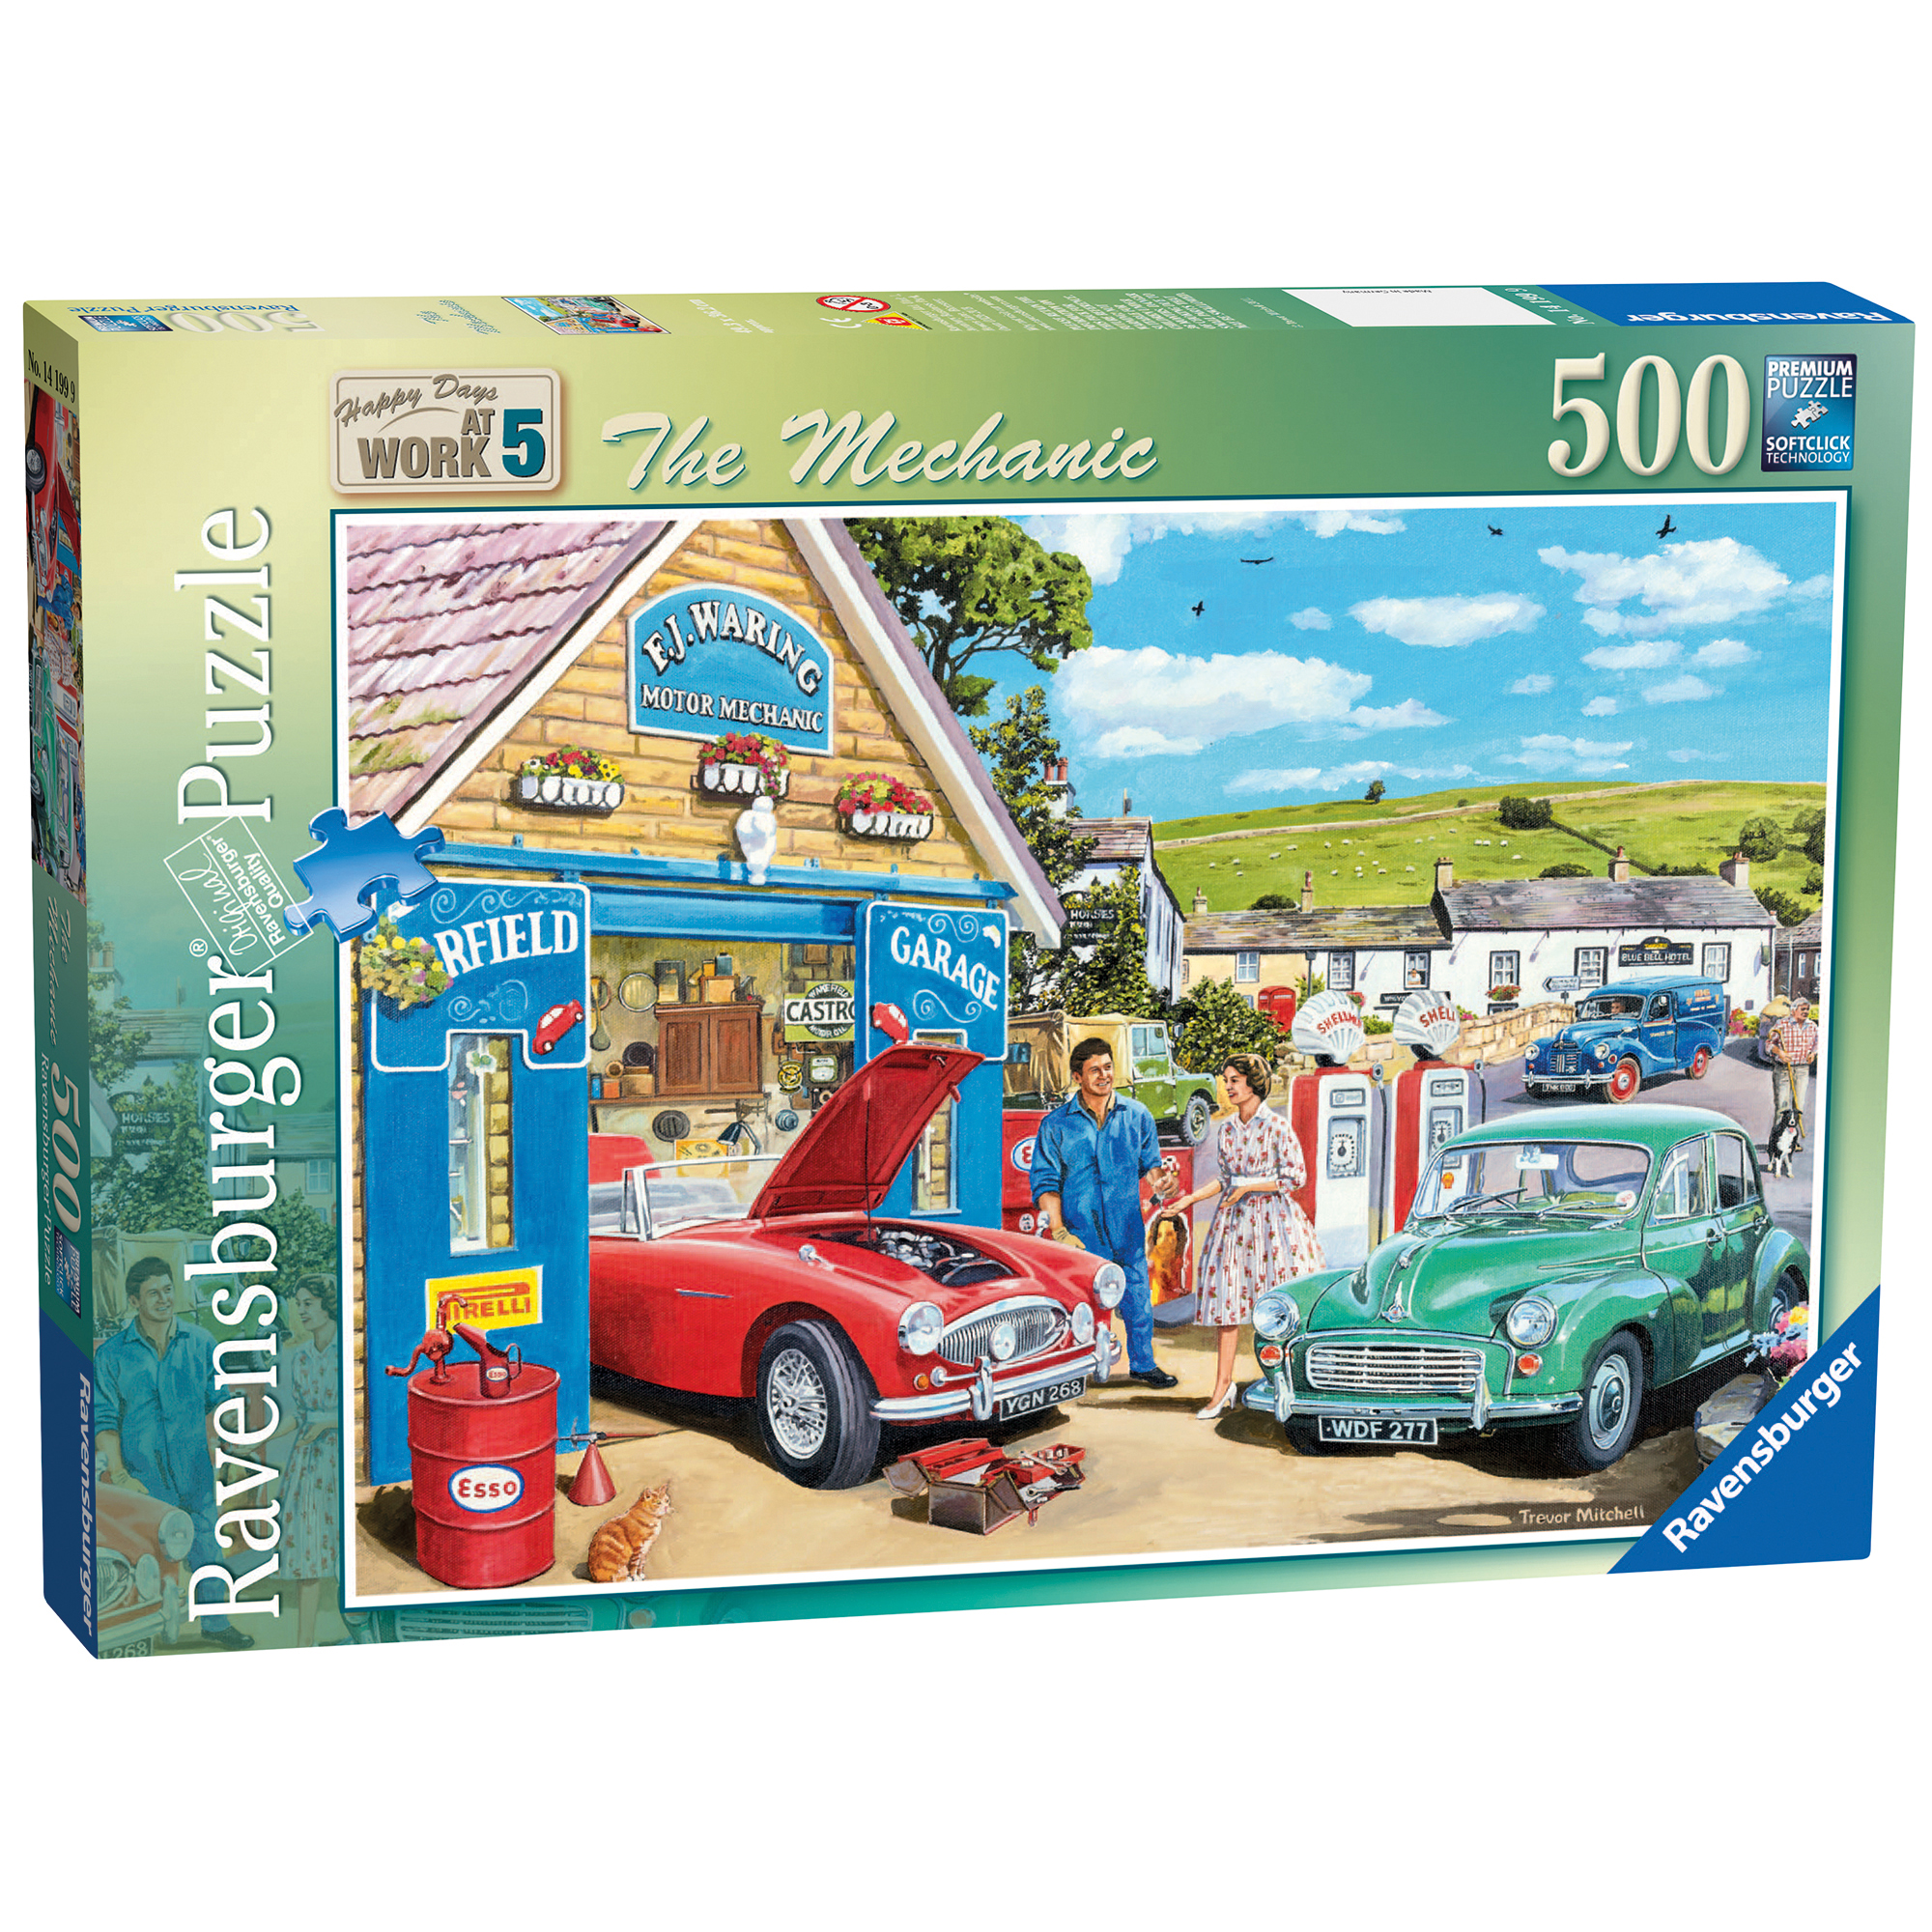 Ravensburger Happy Days at Work 500 Piece Puzzle - The Mechanic